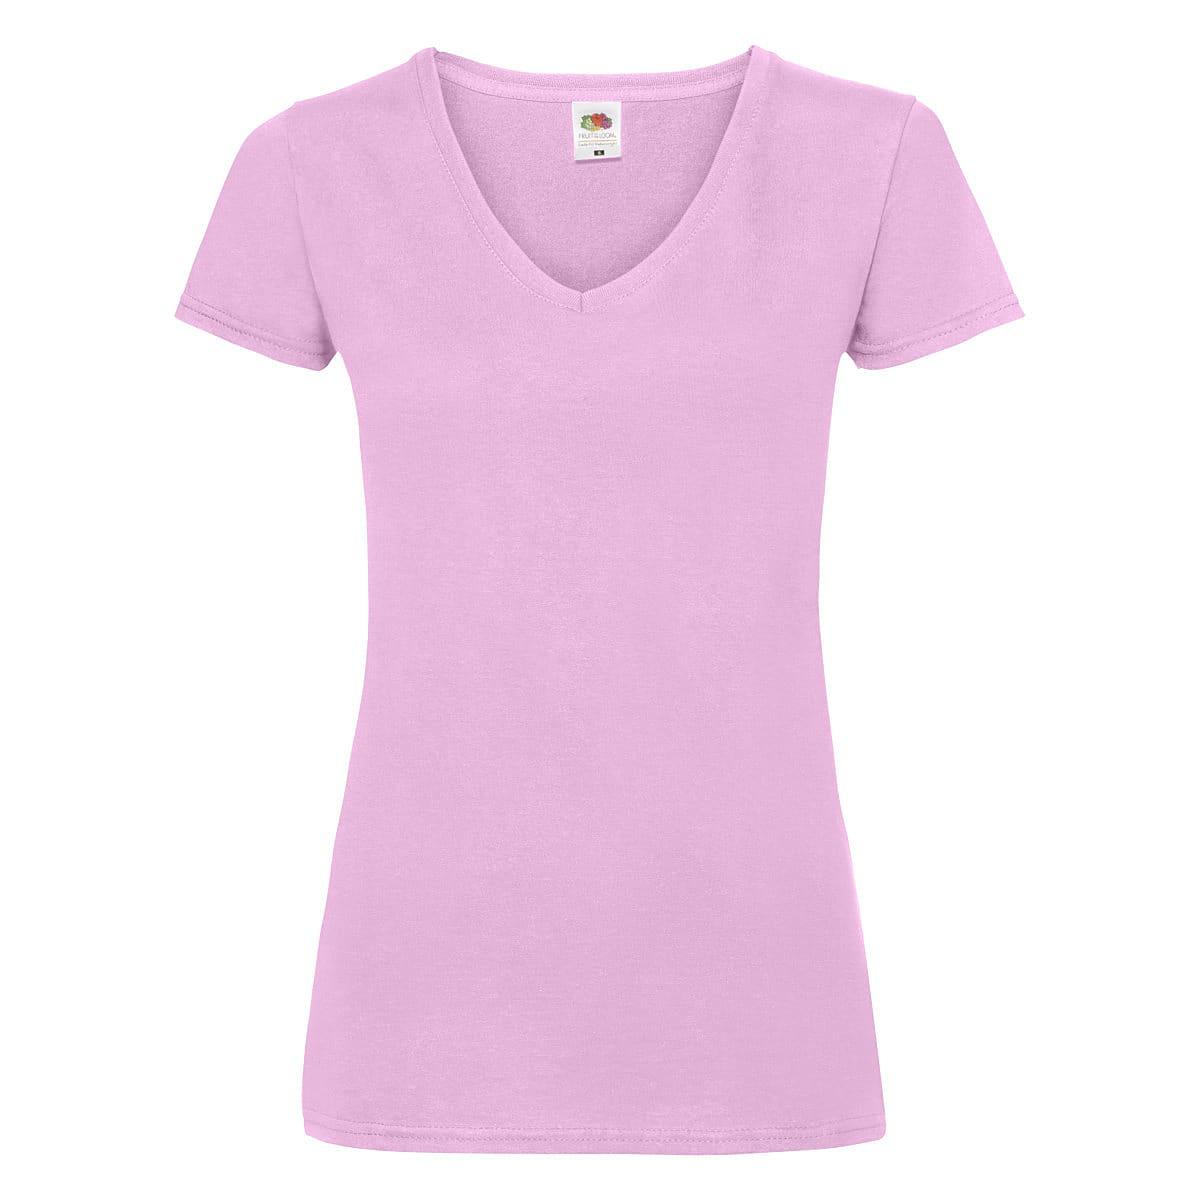 Fruit Of The Loom Lady-Fit Valueweight V-Neck T-Shirt in Light Pink (Product Code: 61398)